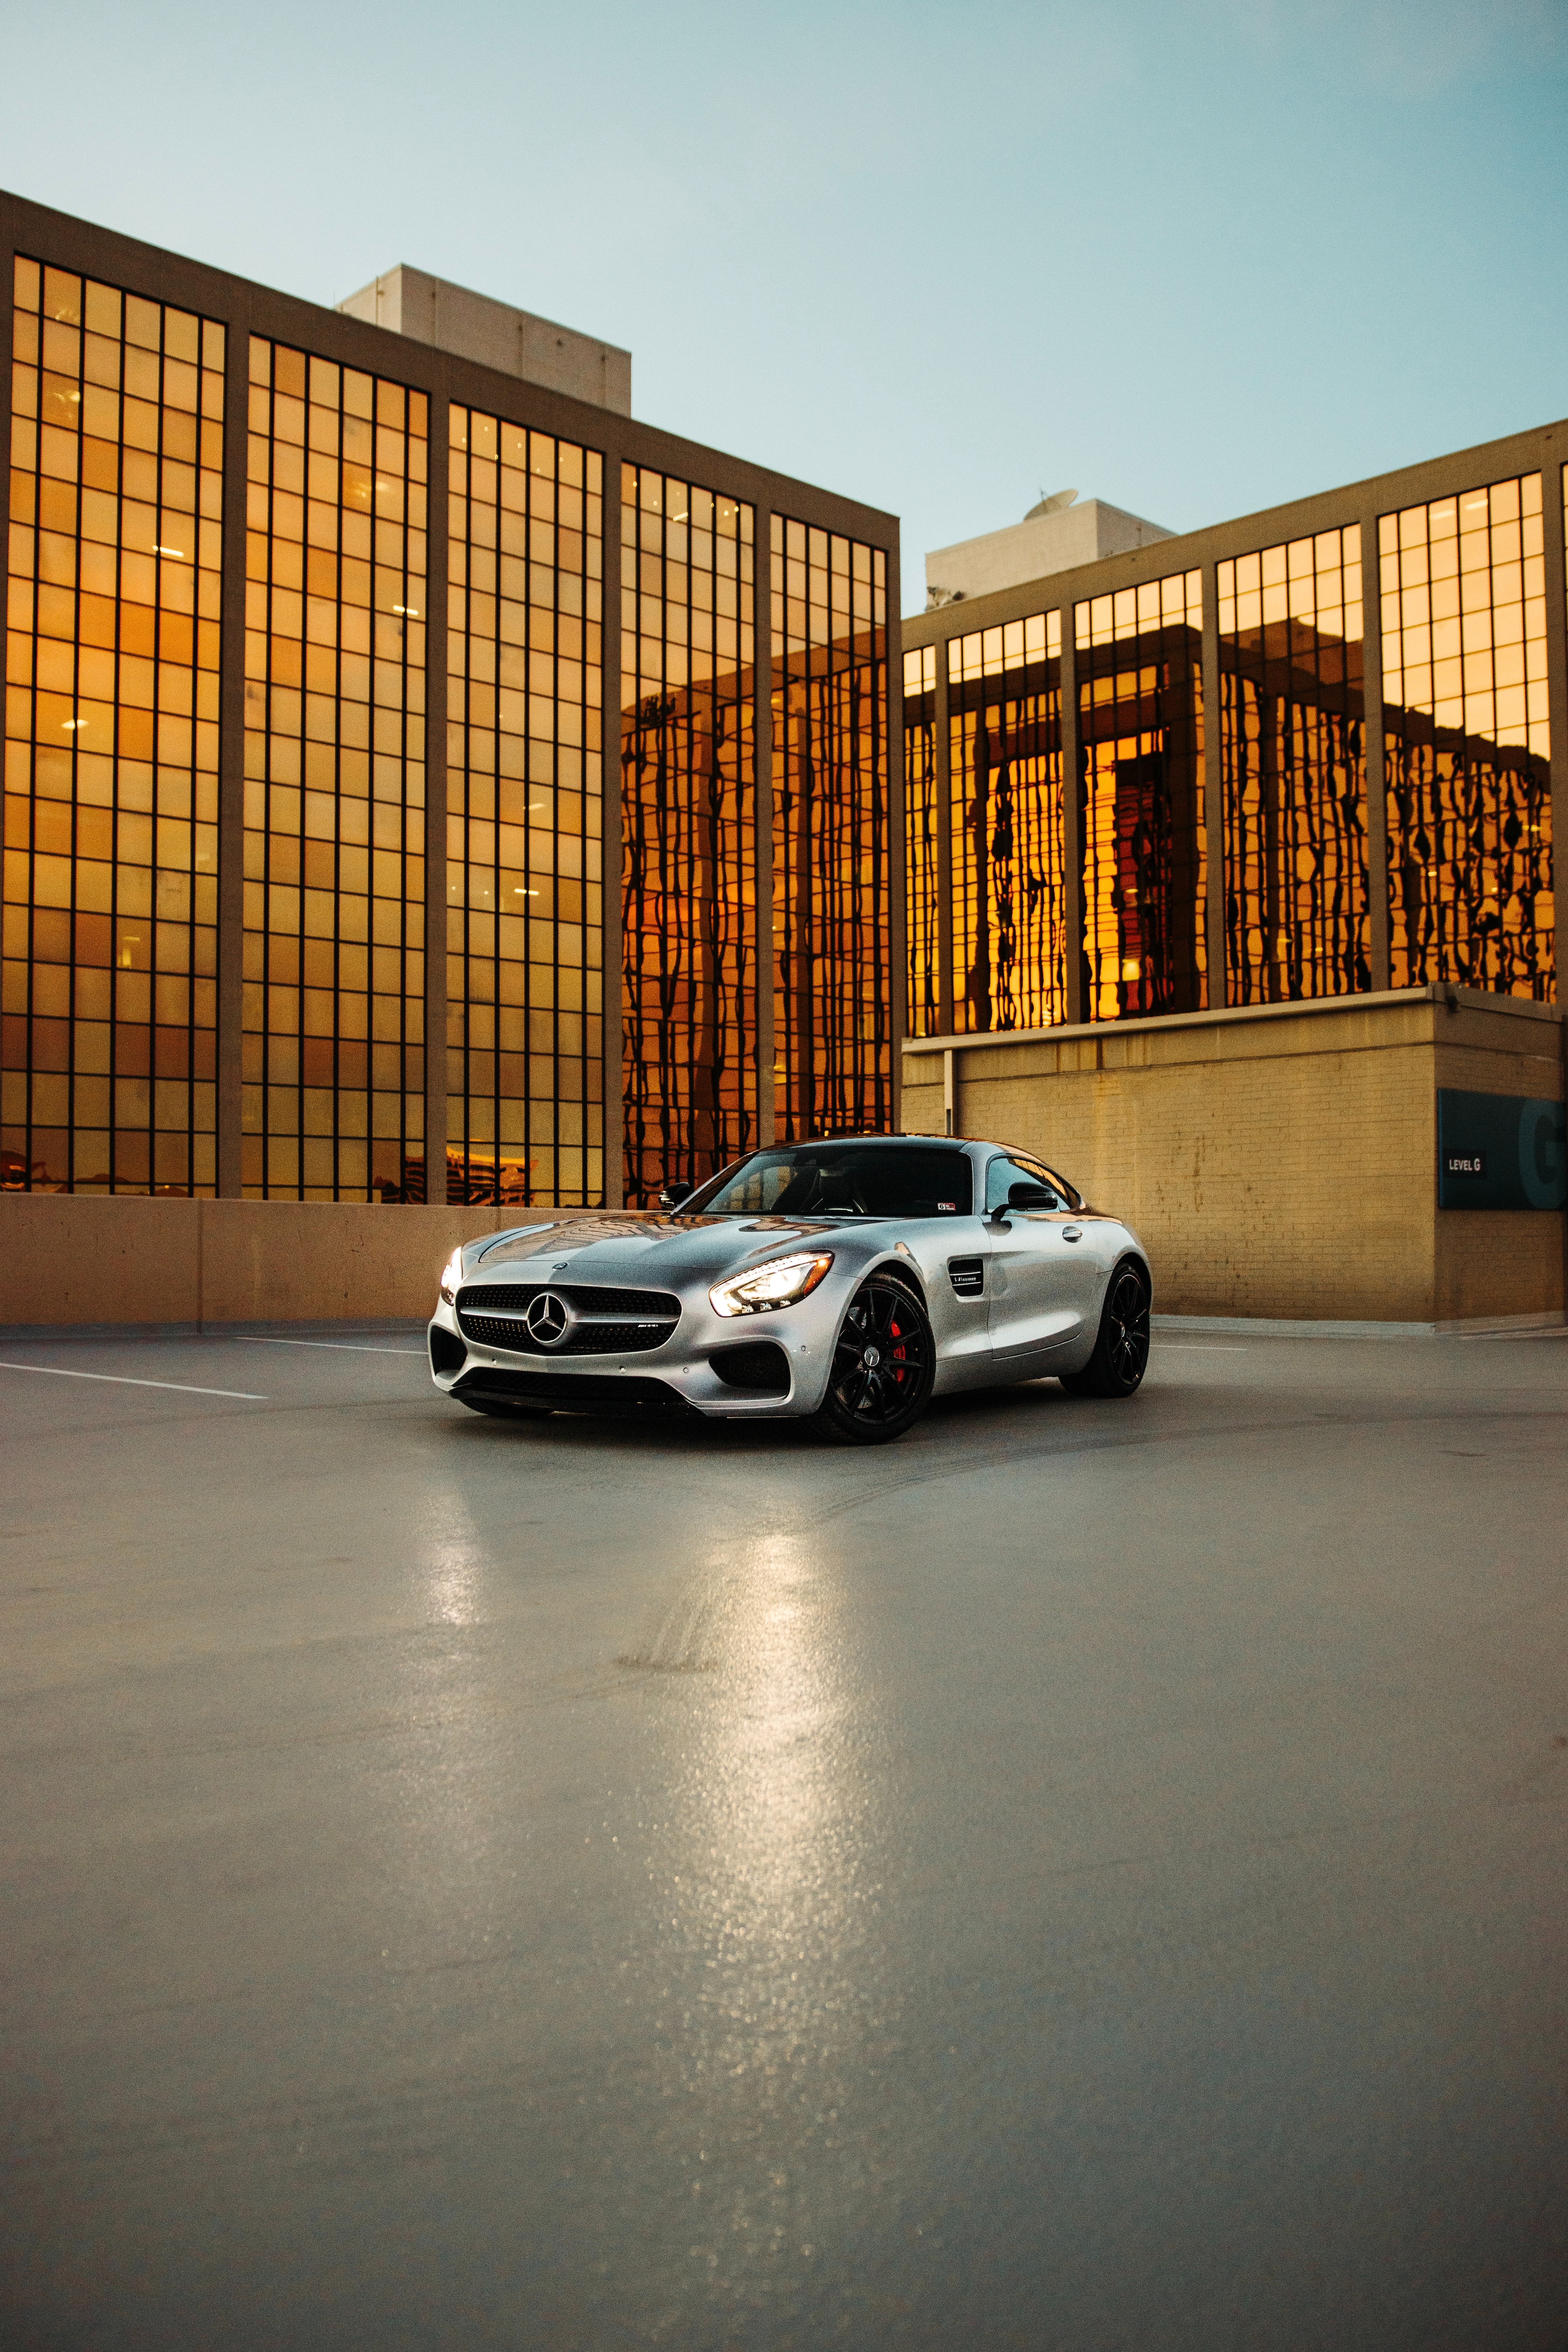 cars, building, car, grey, mercedes, parking wallpapers for tablet